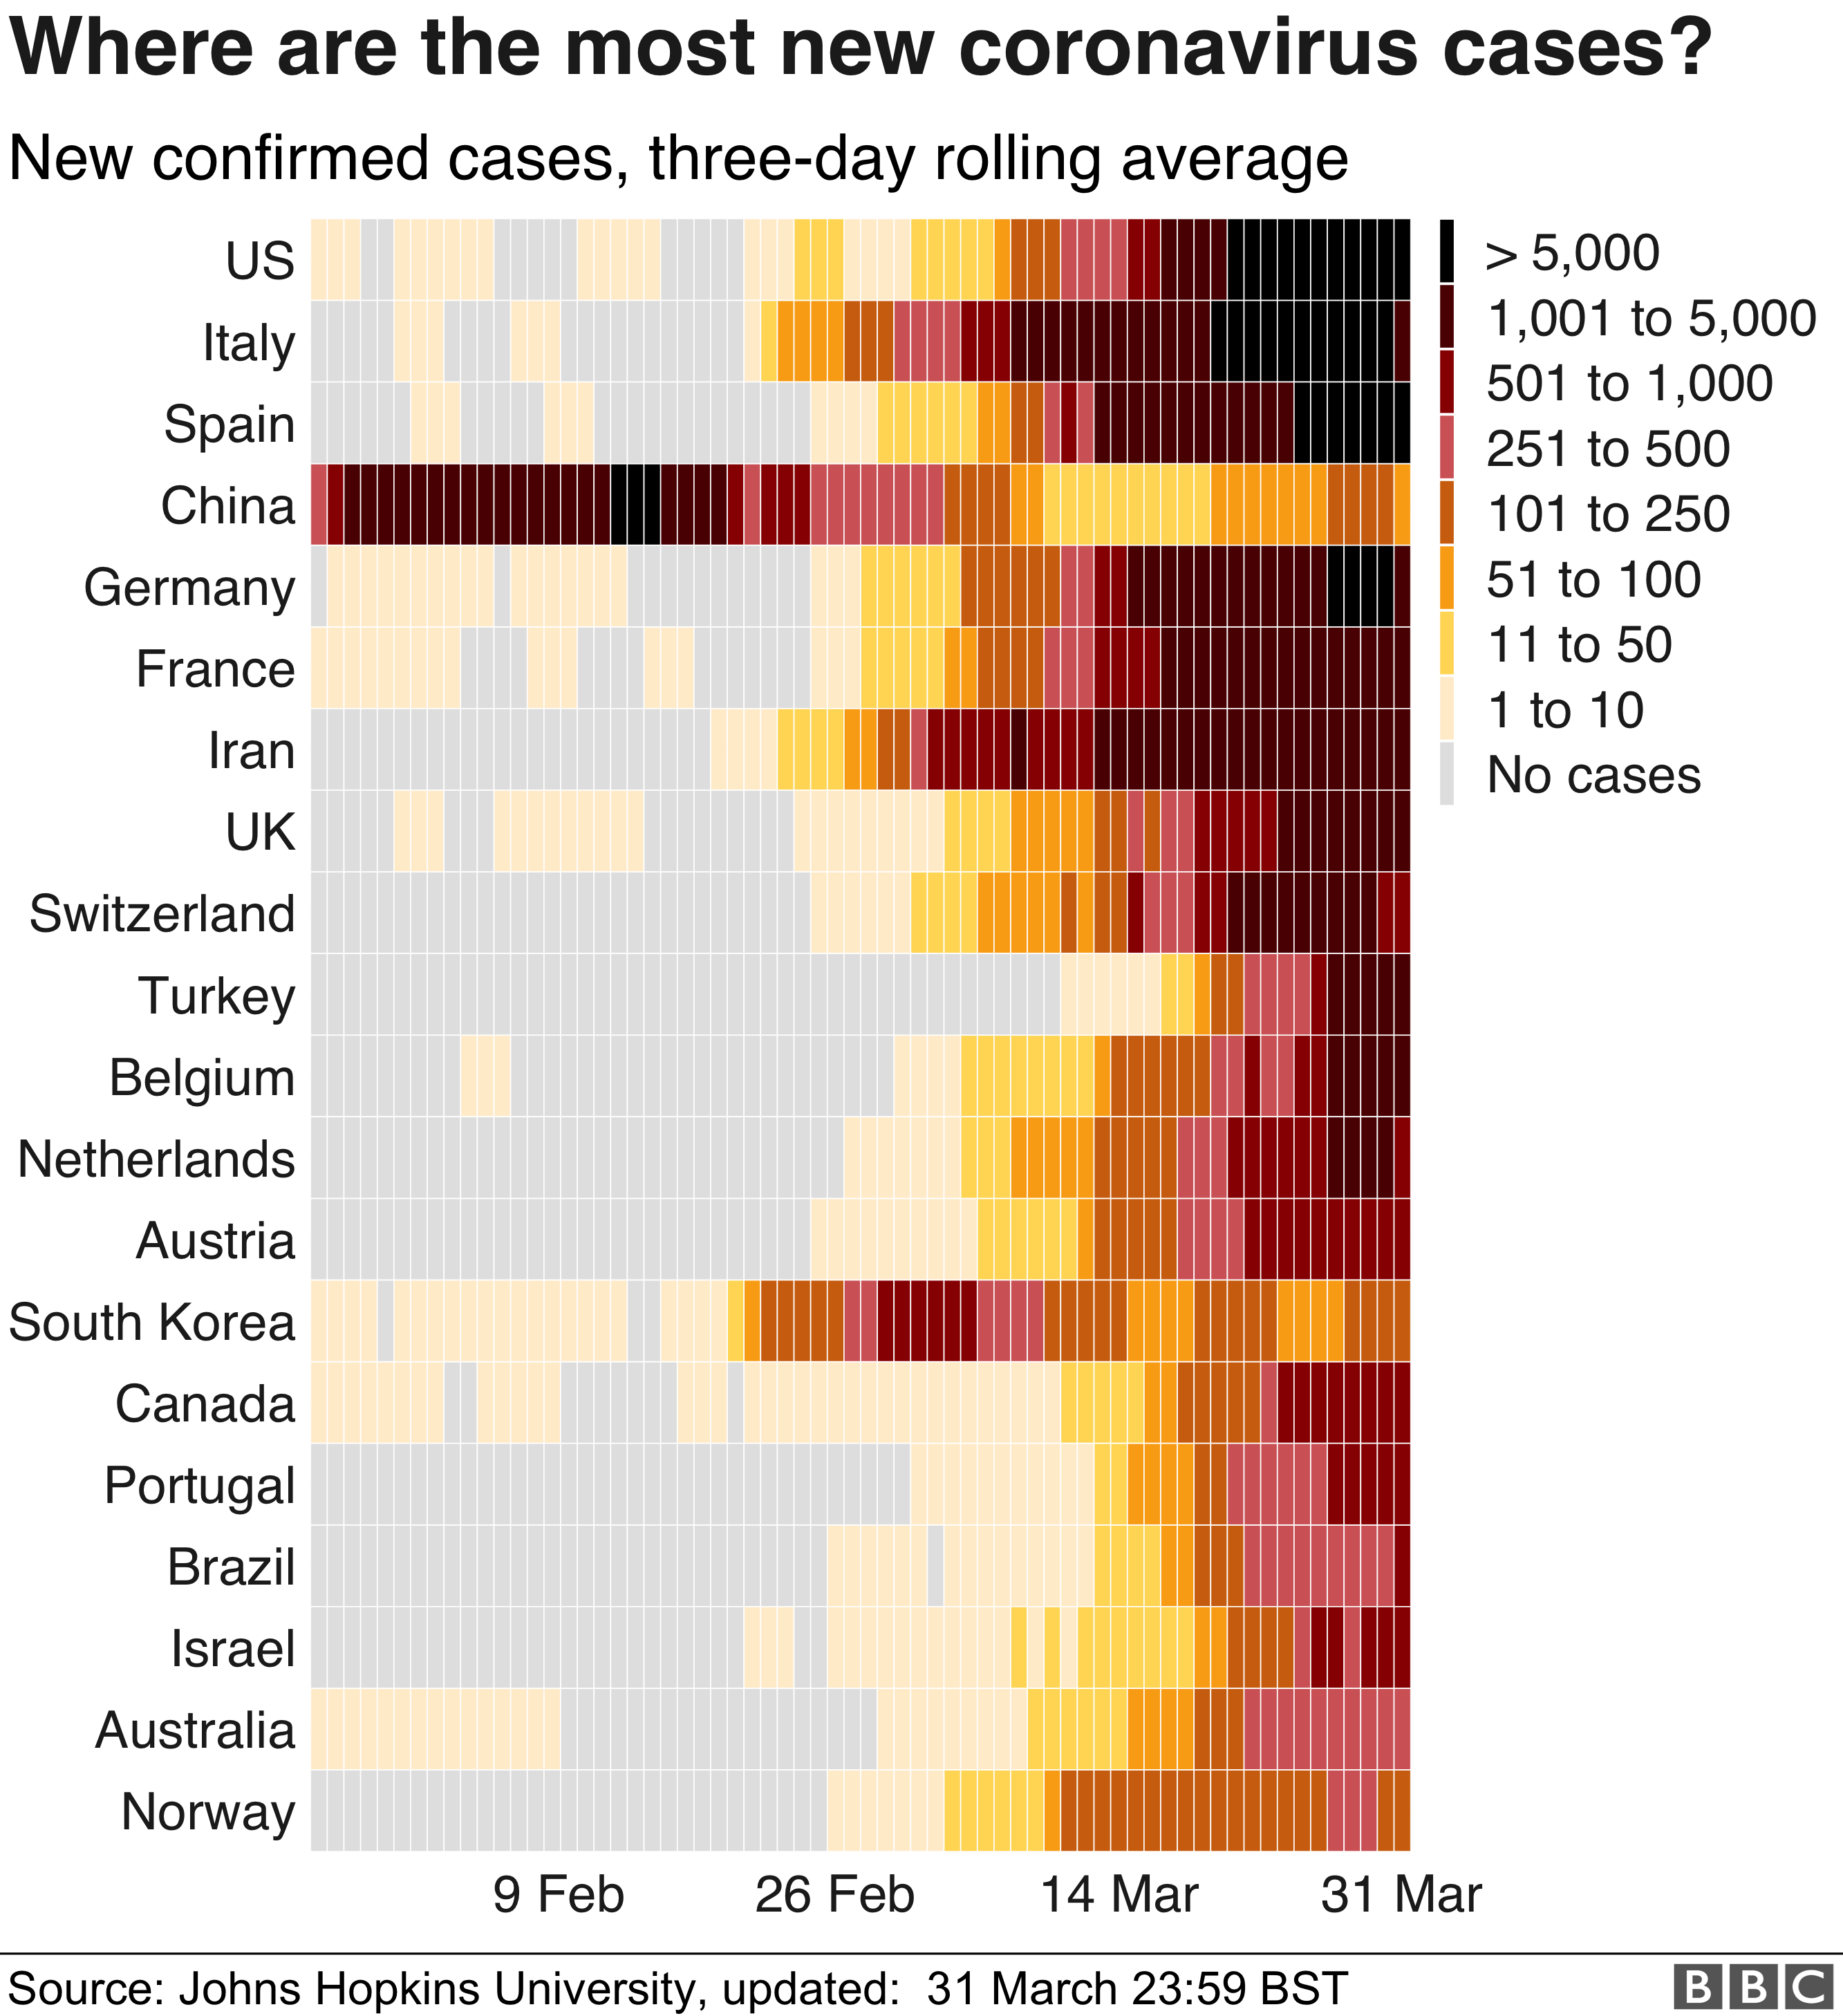 Chart showing top 20 countries and how many cases of coronavirus they've had over the past few weeks